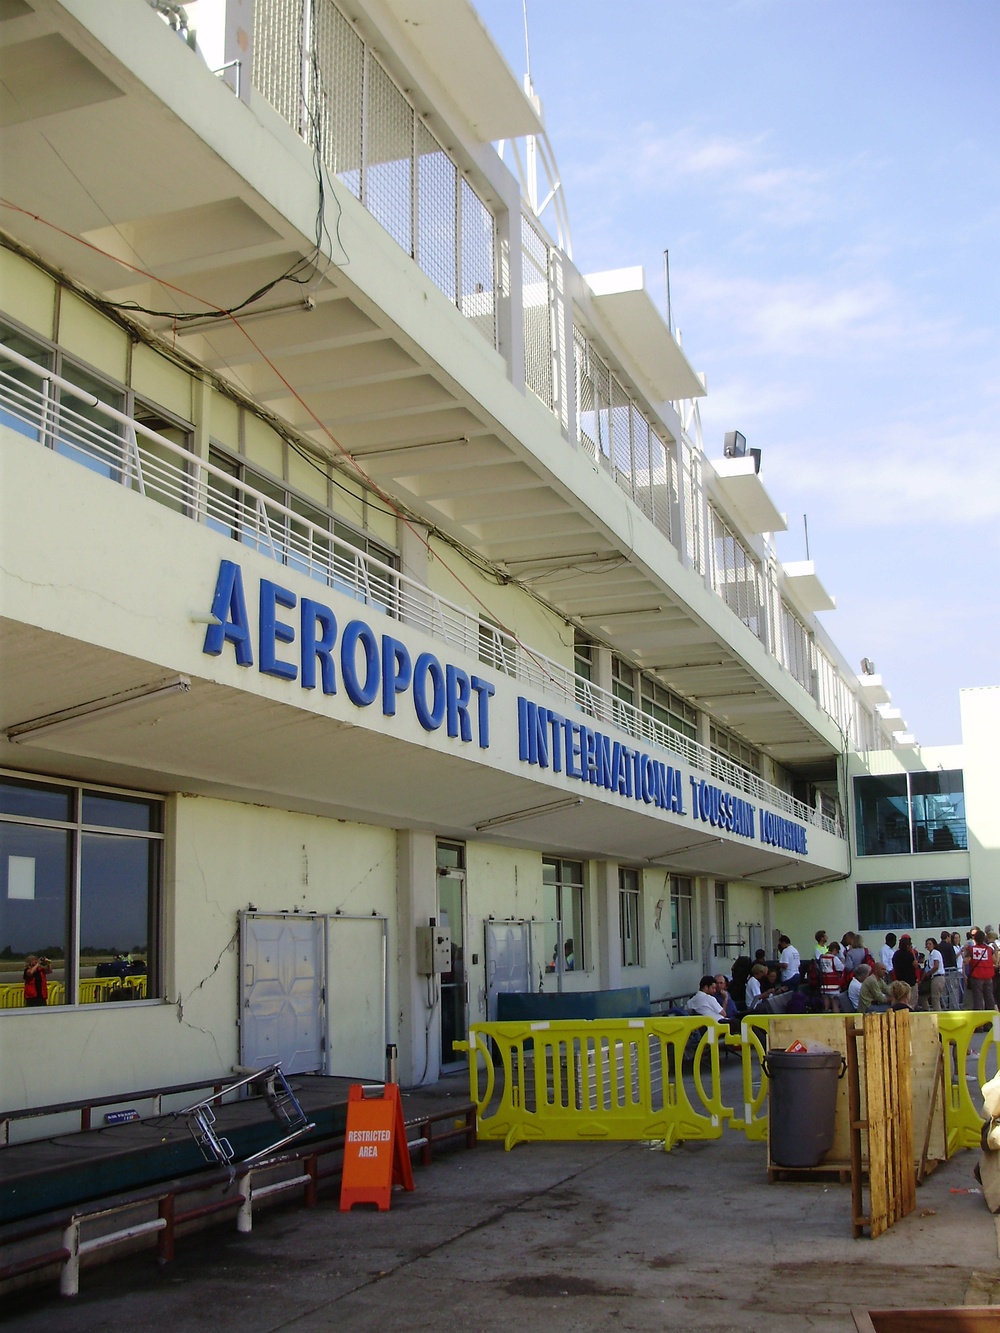 Commercial Air-traffic Increases at Port Au Prince Airport